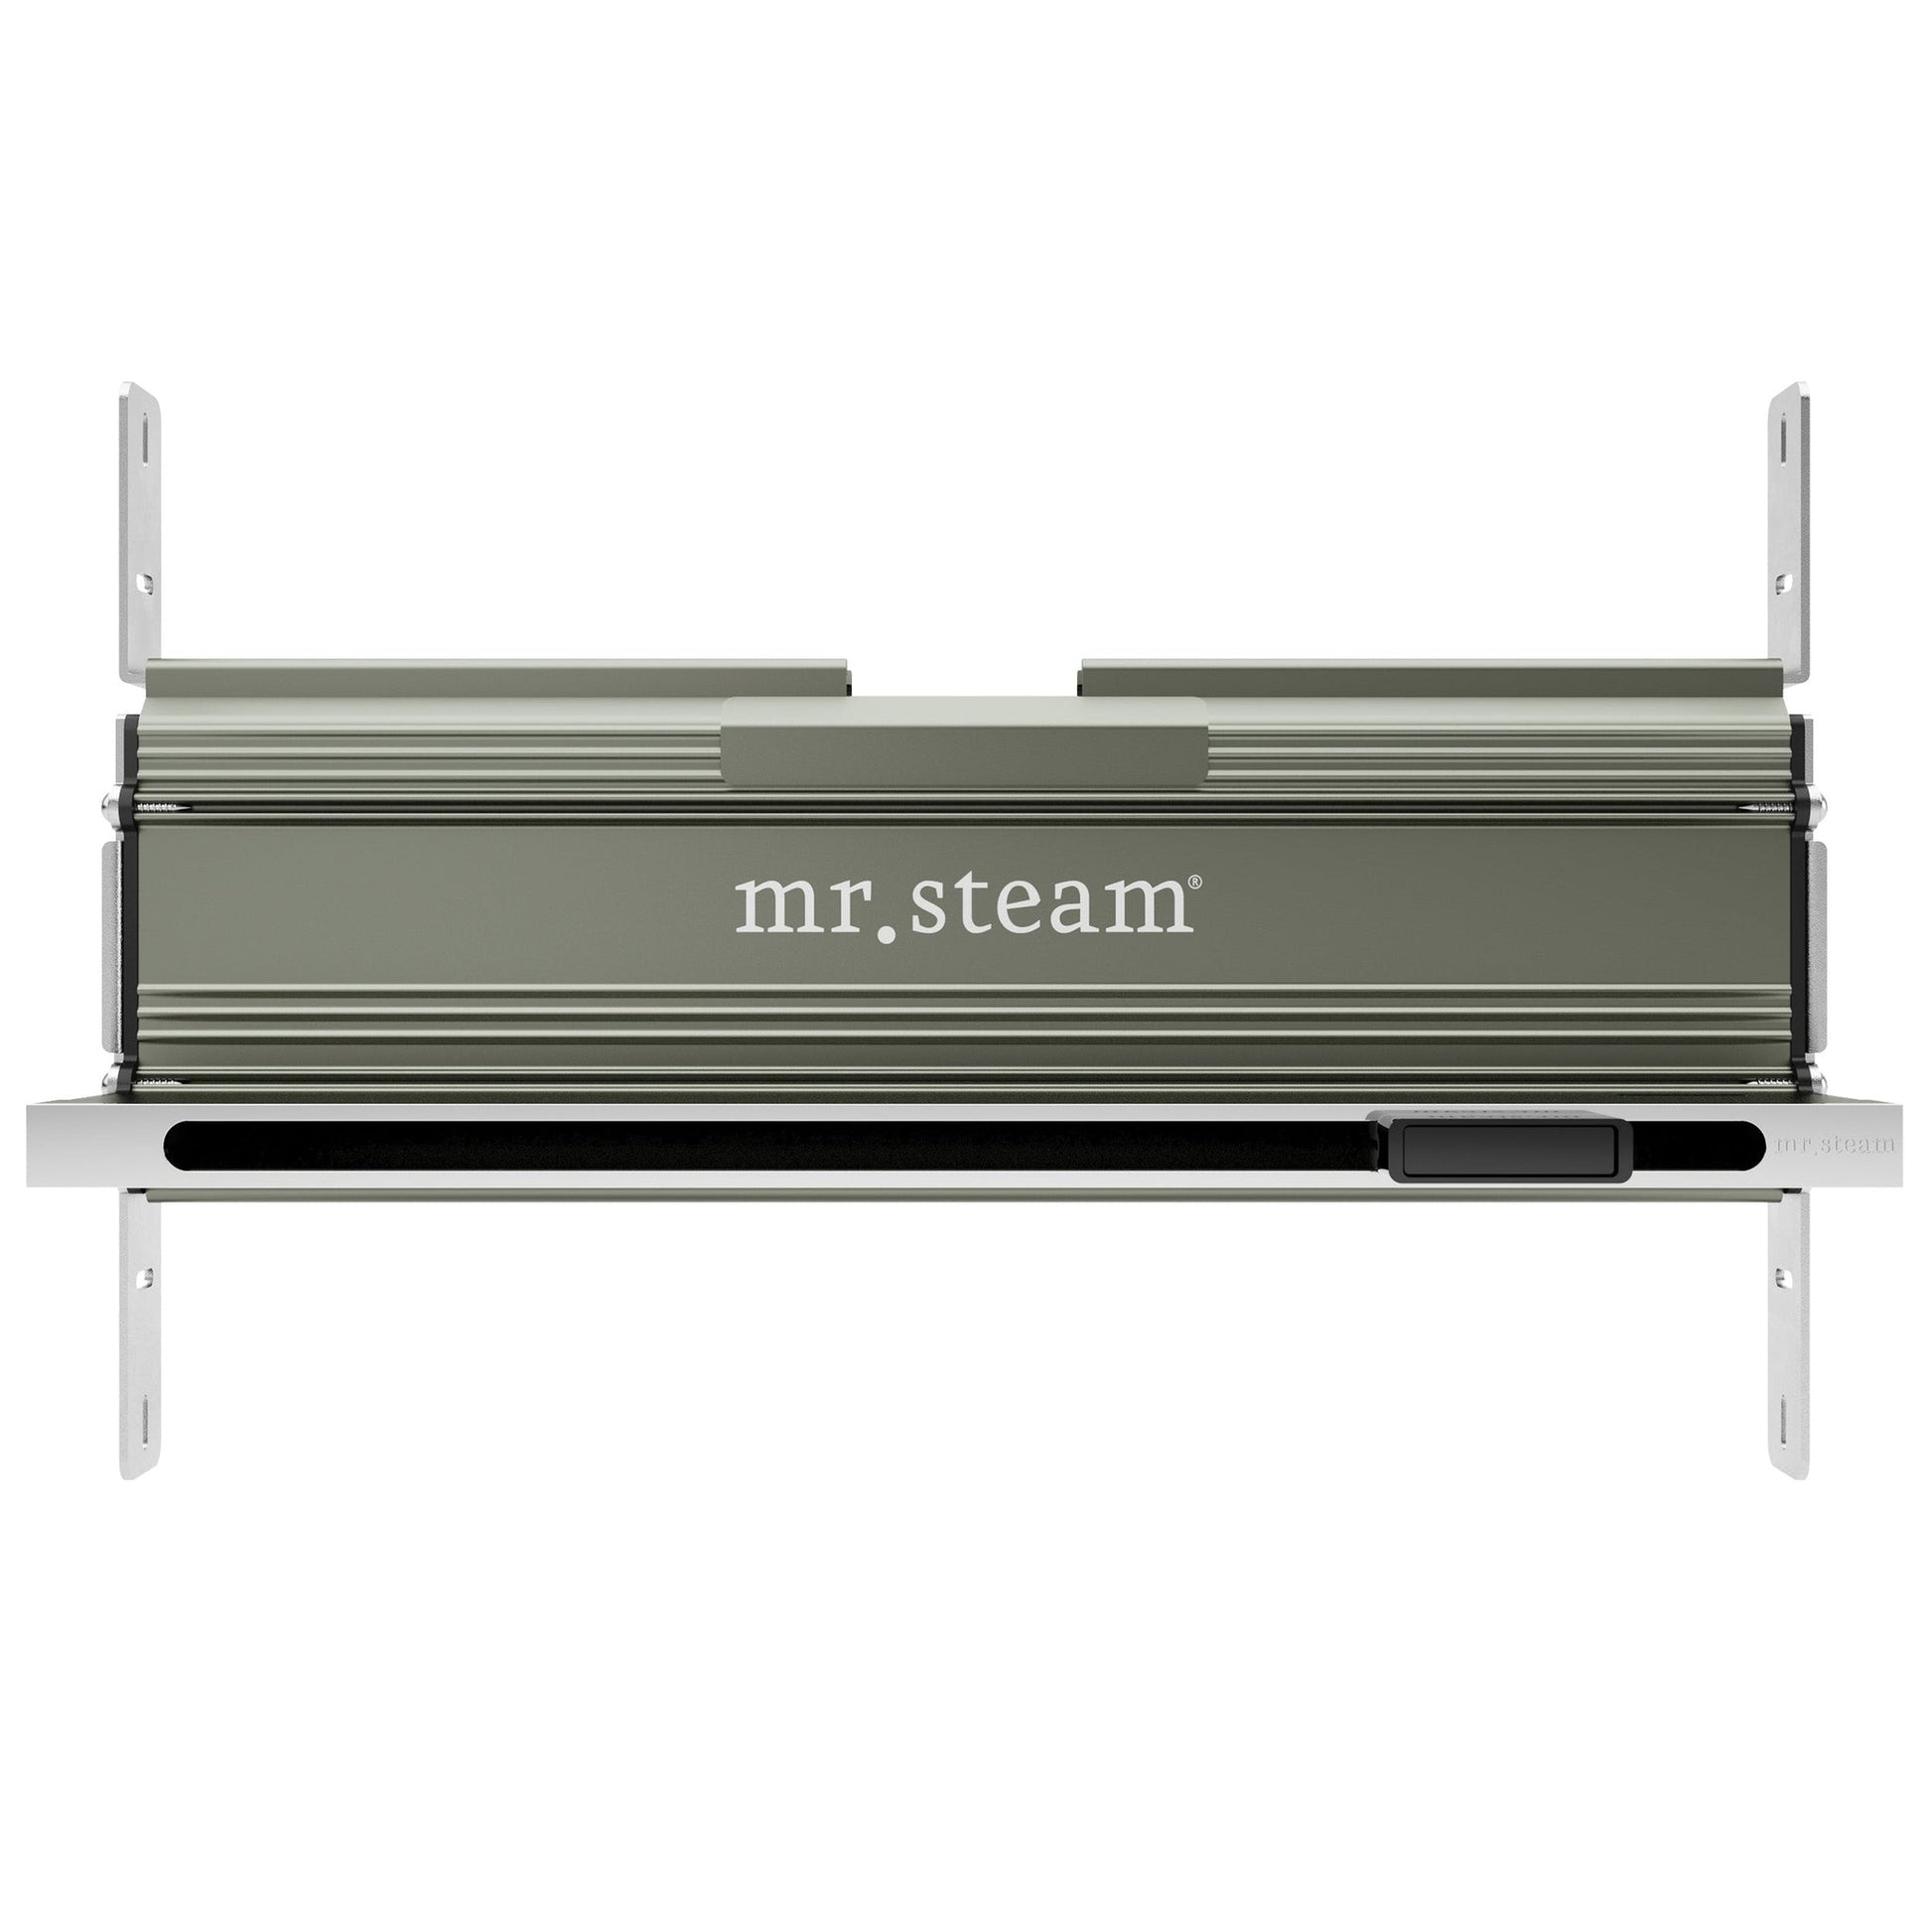 MrSteam Butler 36" x 12" x 12" Max Linear Steam Generator Control Kit Package in Square Black with Autoflush, Condensation Pan, Steamlinx, Steamhead